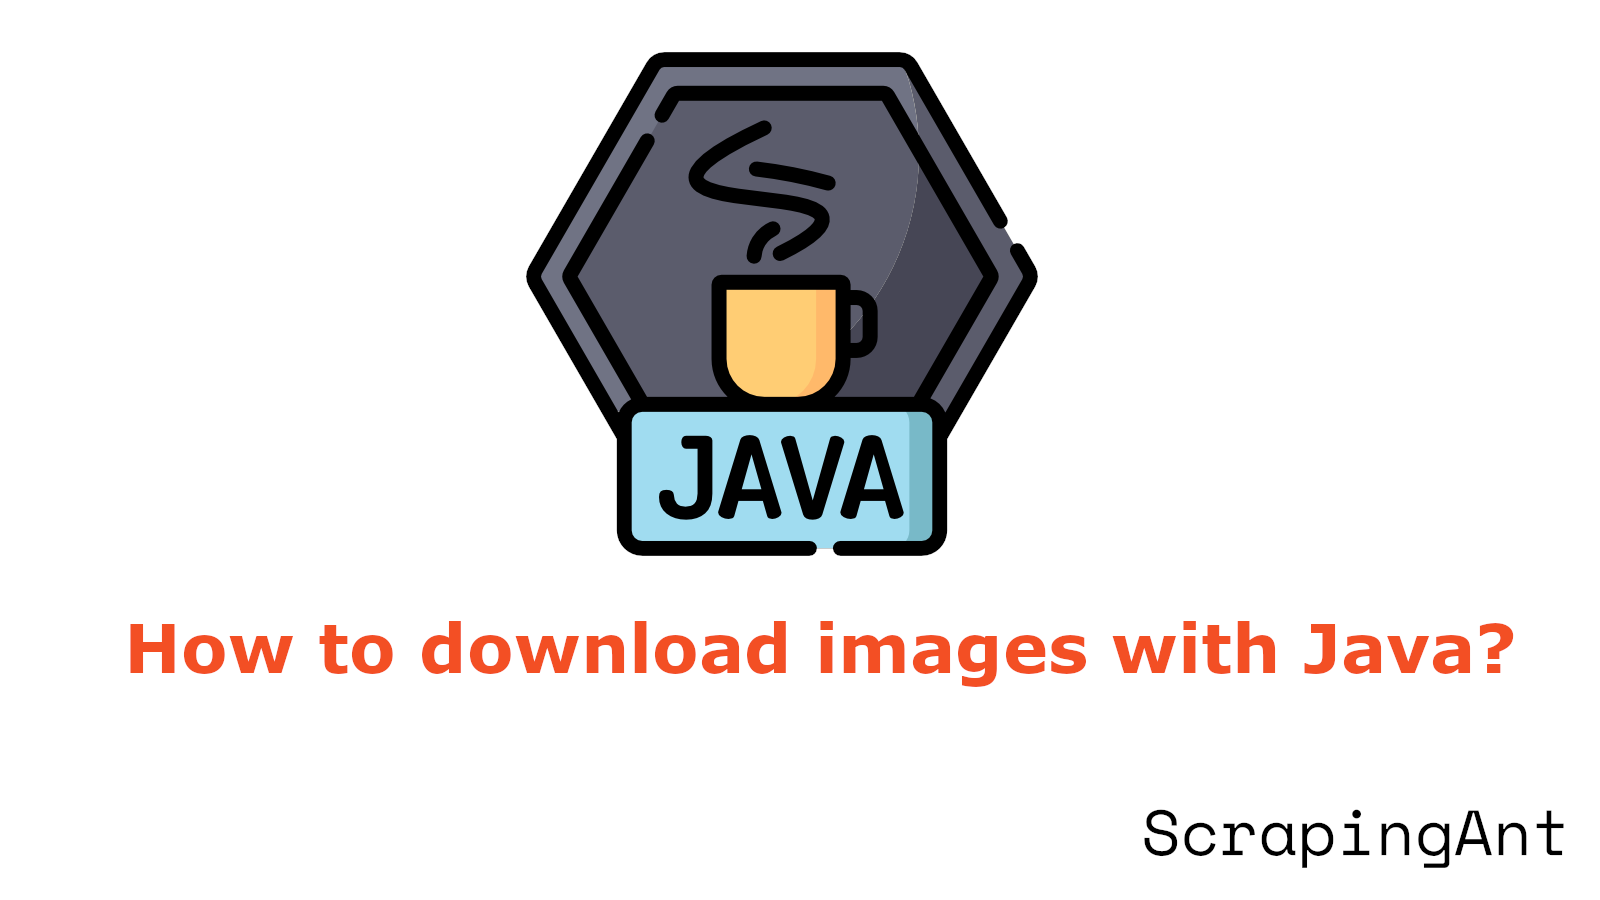 How to download images with Java?